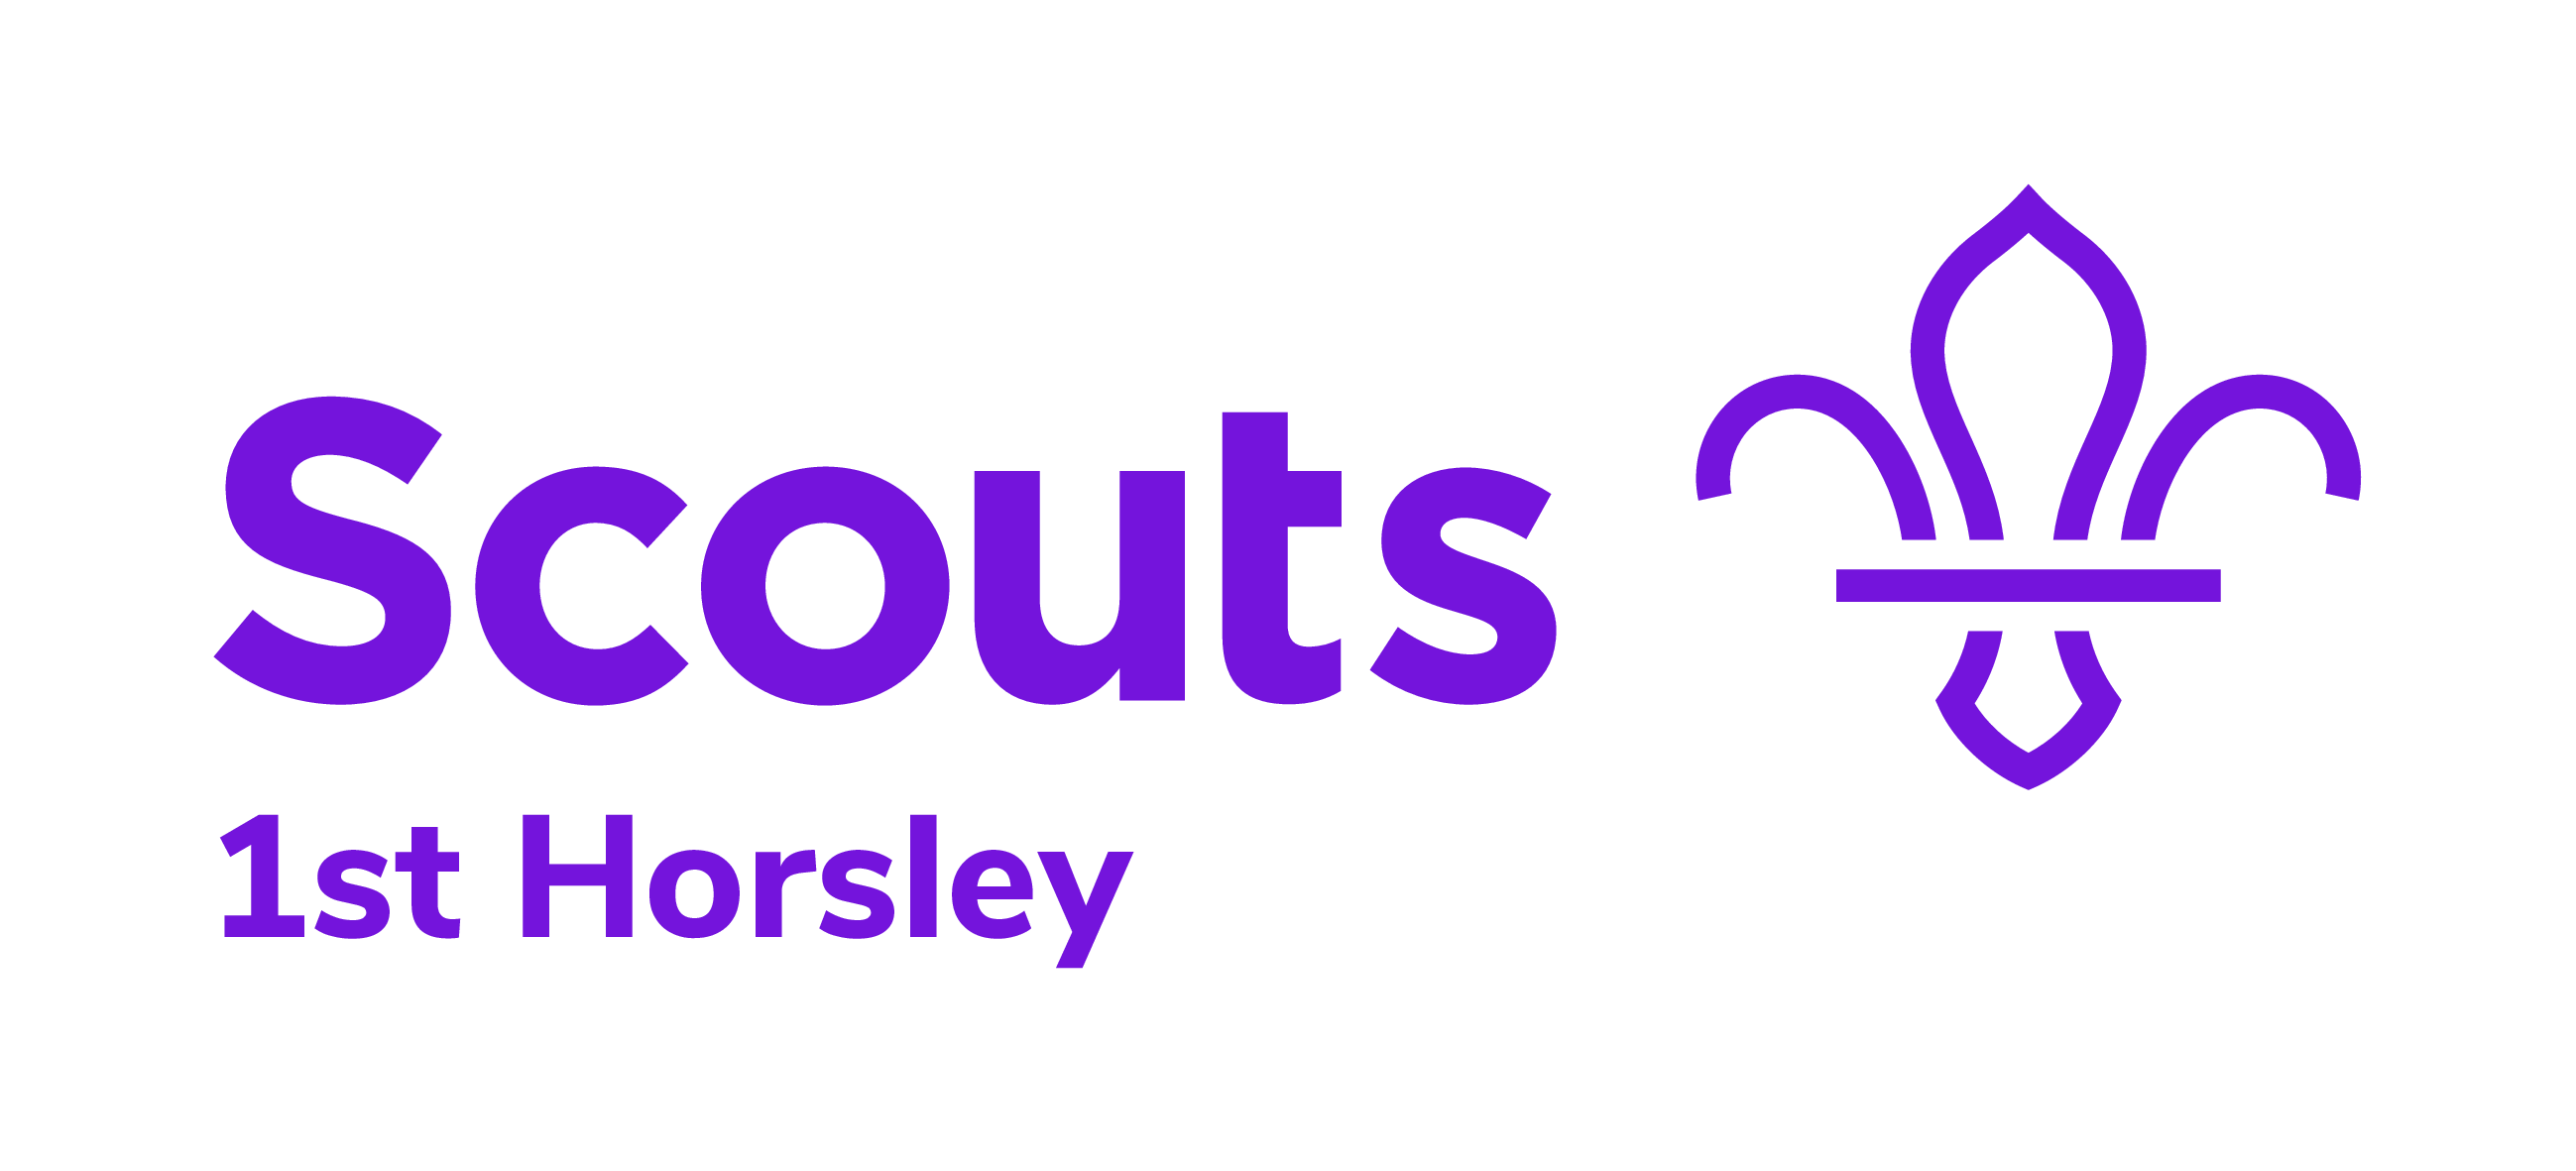 1st horsley scout logo